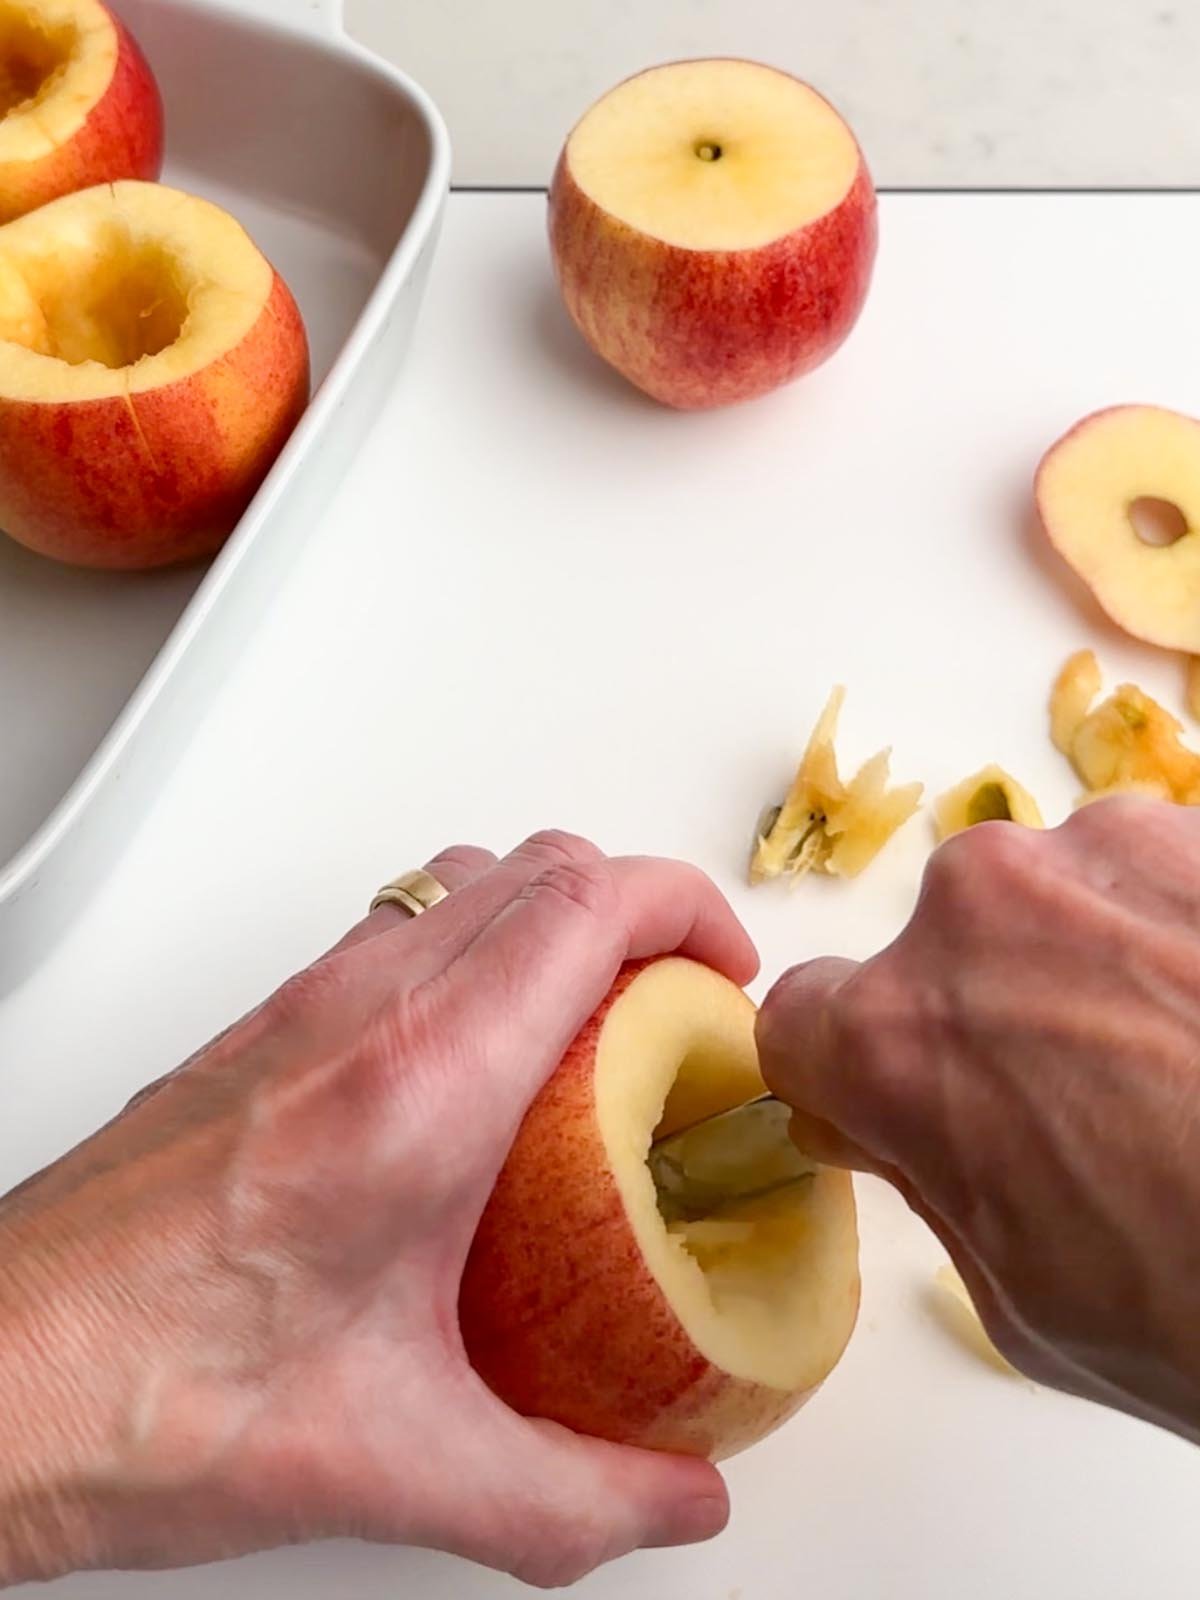 hands holding an apple and a spoon coring an apple